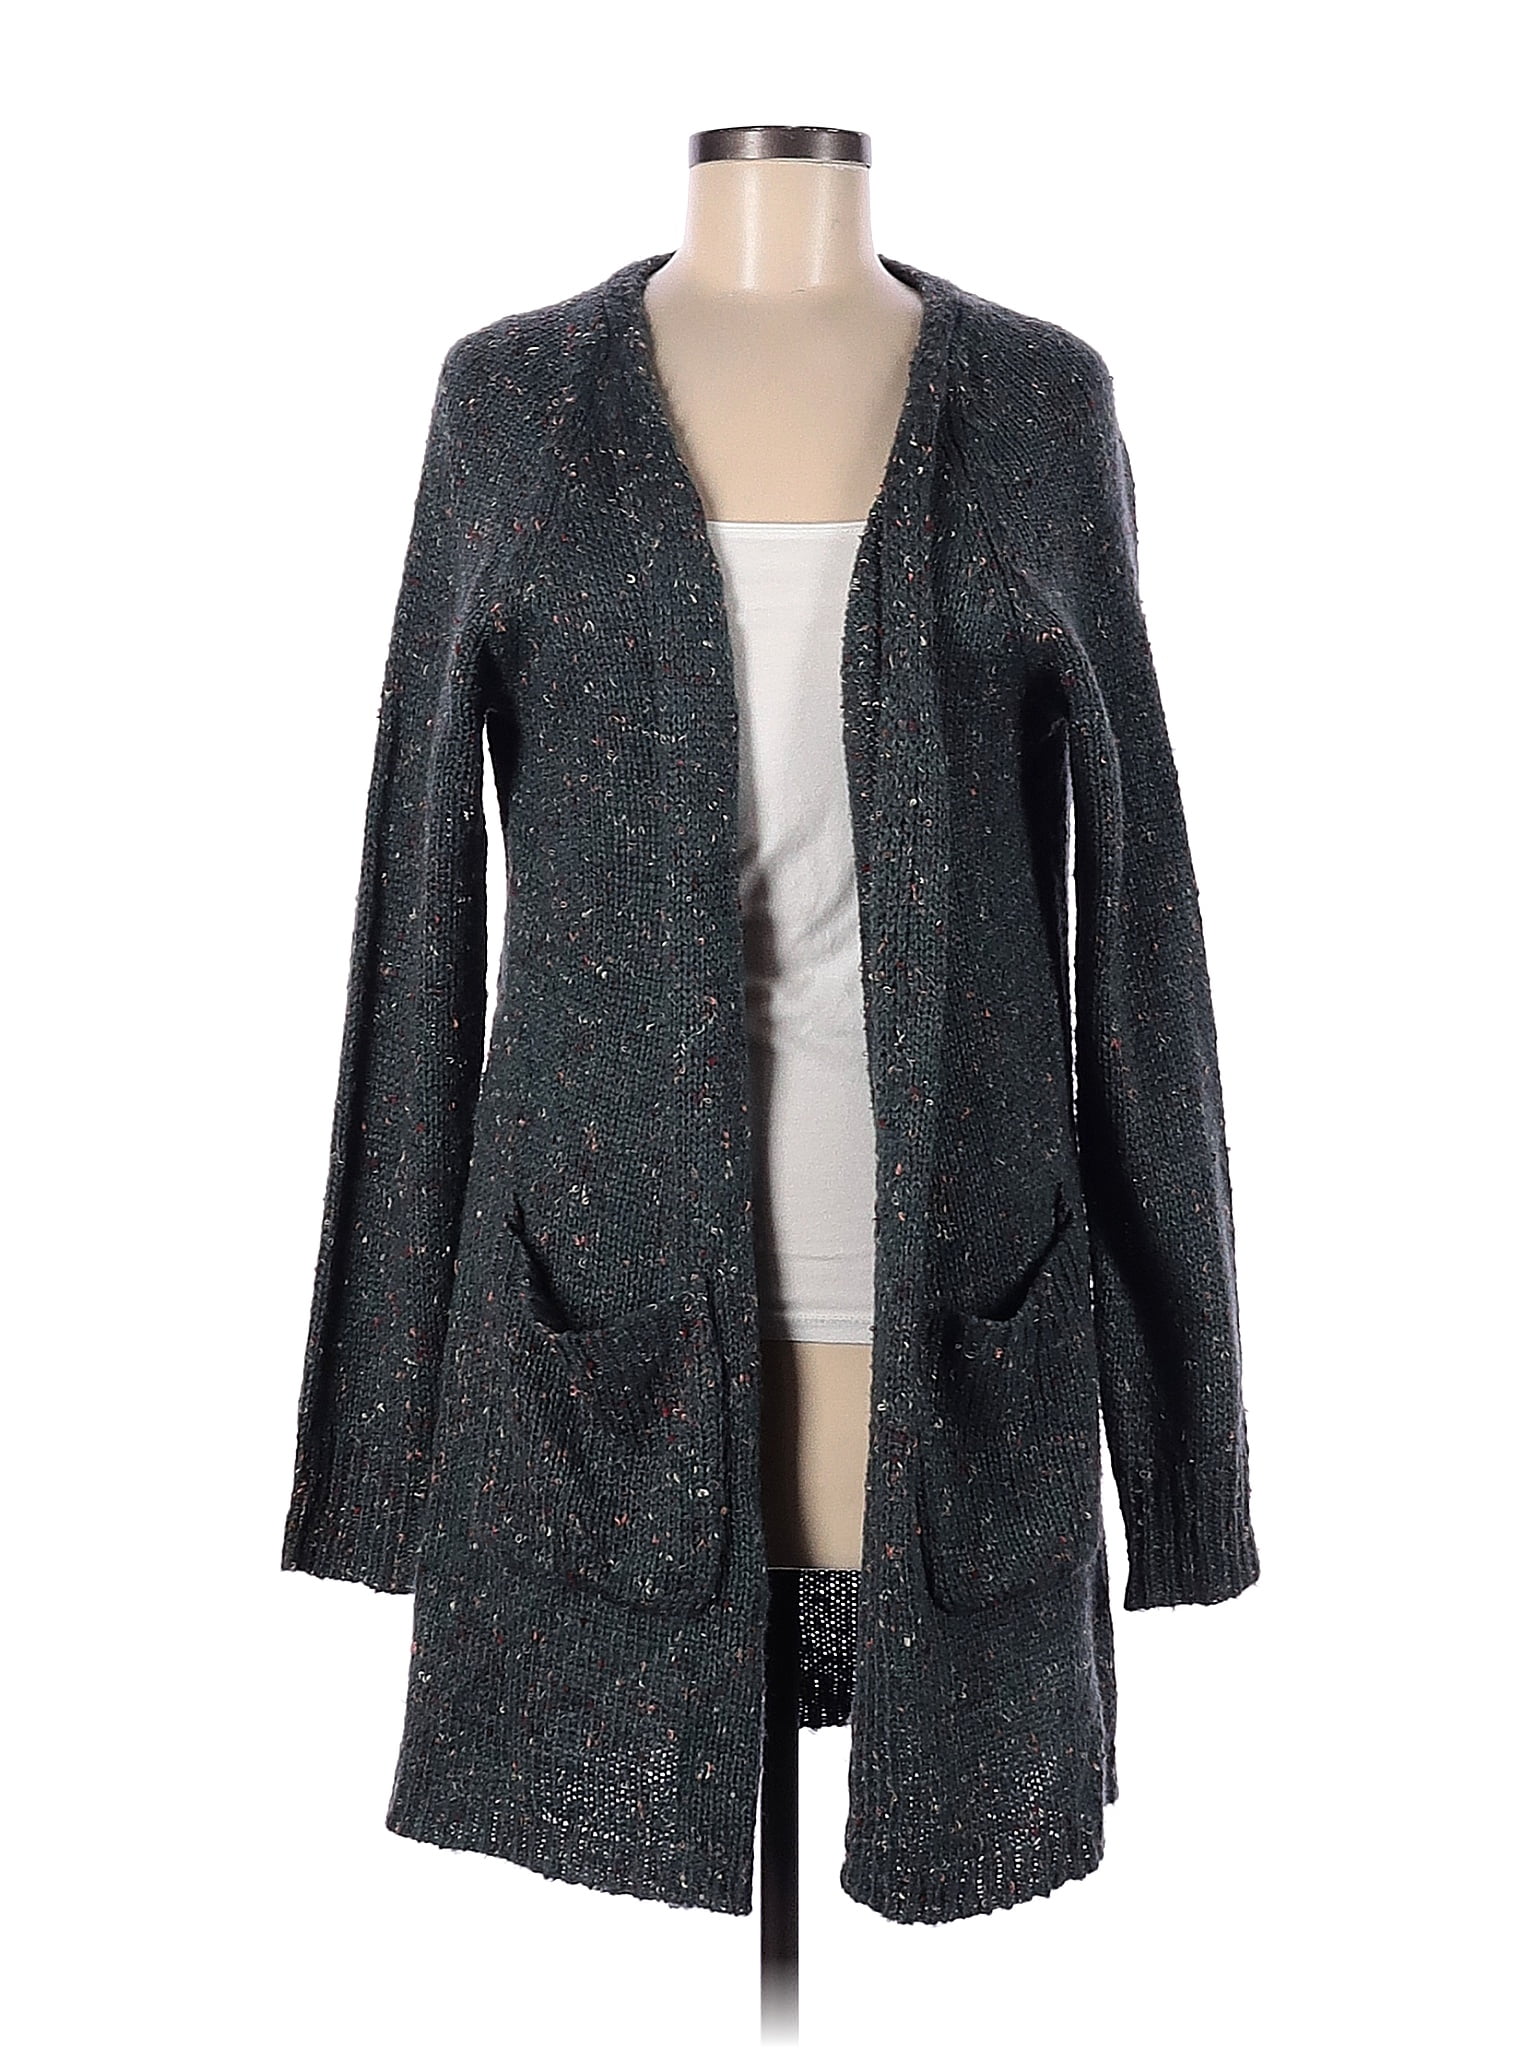 Knox Rose Women's Plus Size Open-Front Cardigan - (XLarge, Gray